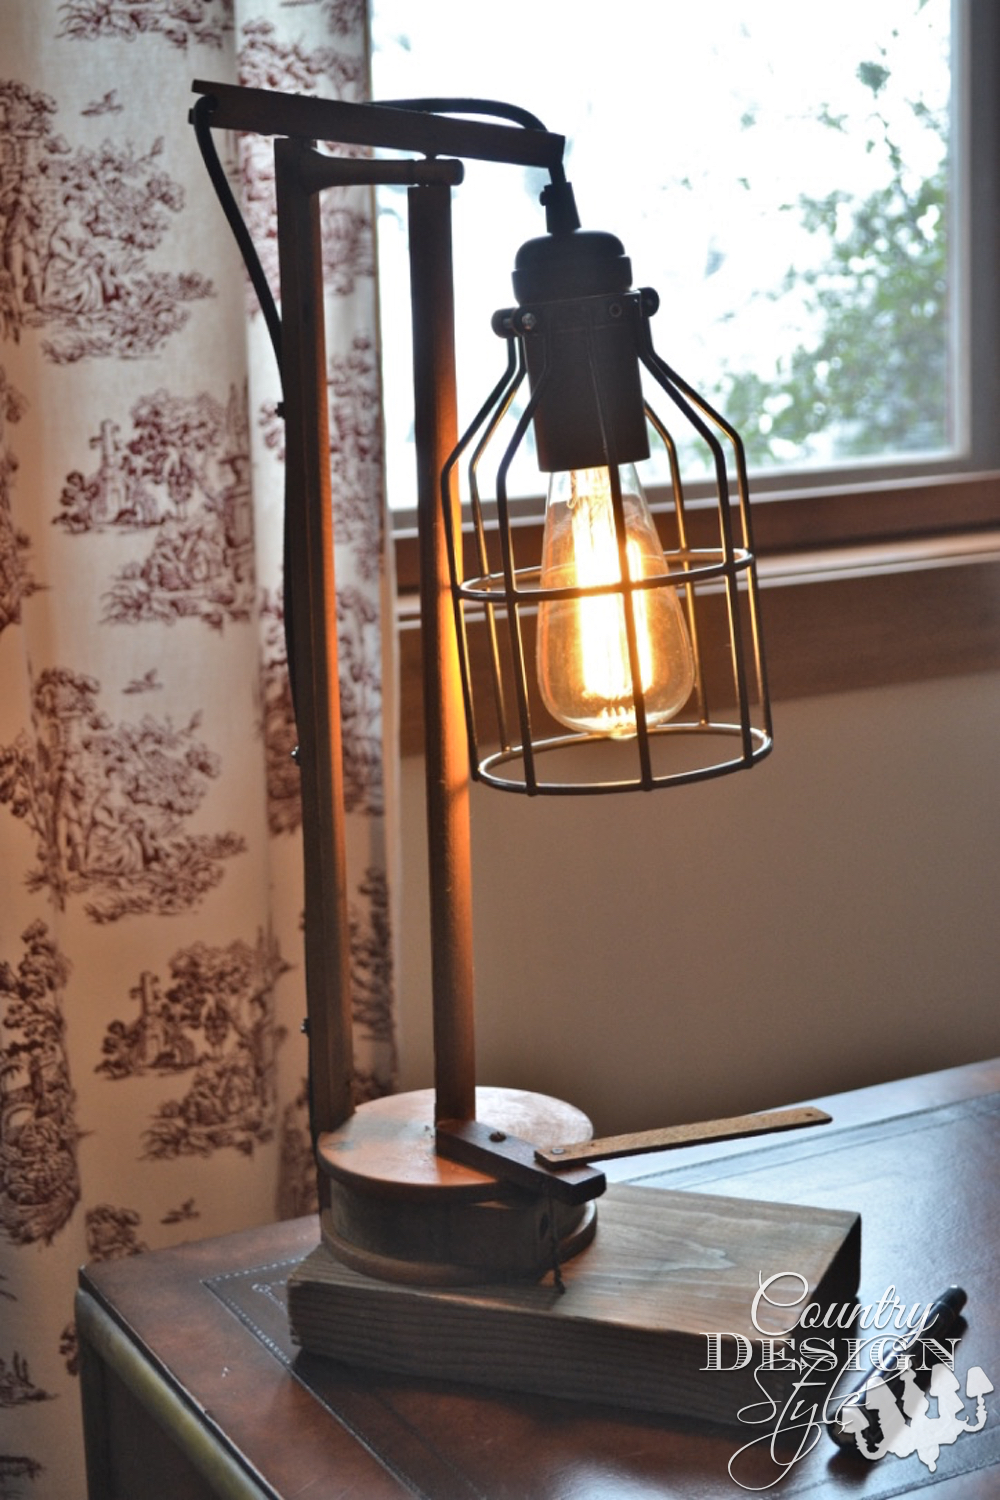 Vintage styled lamp | Country Design Style | countrydesignstyle.com